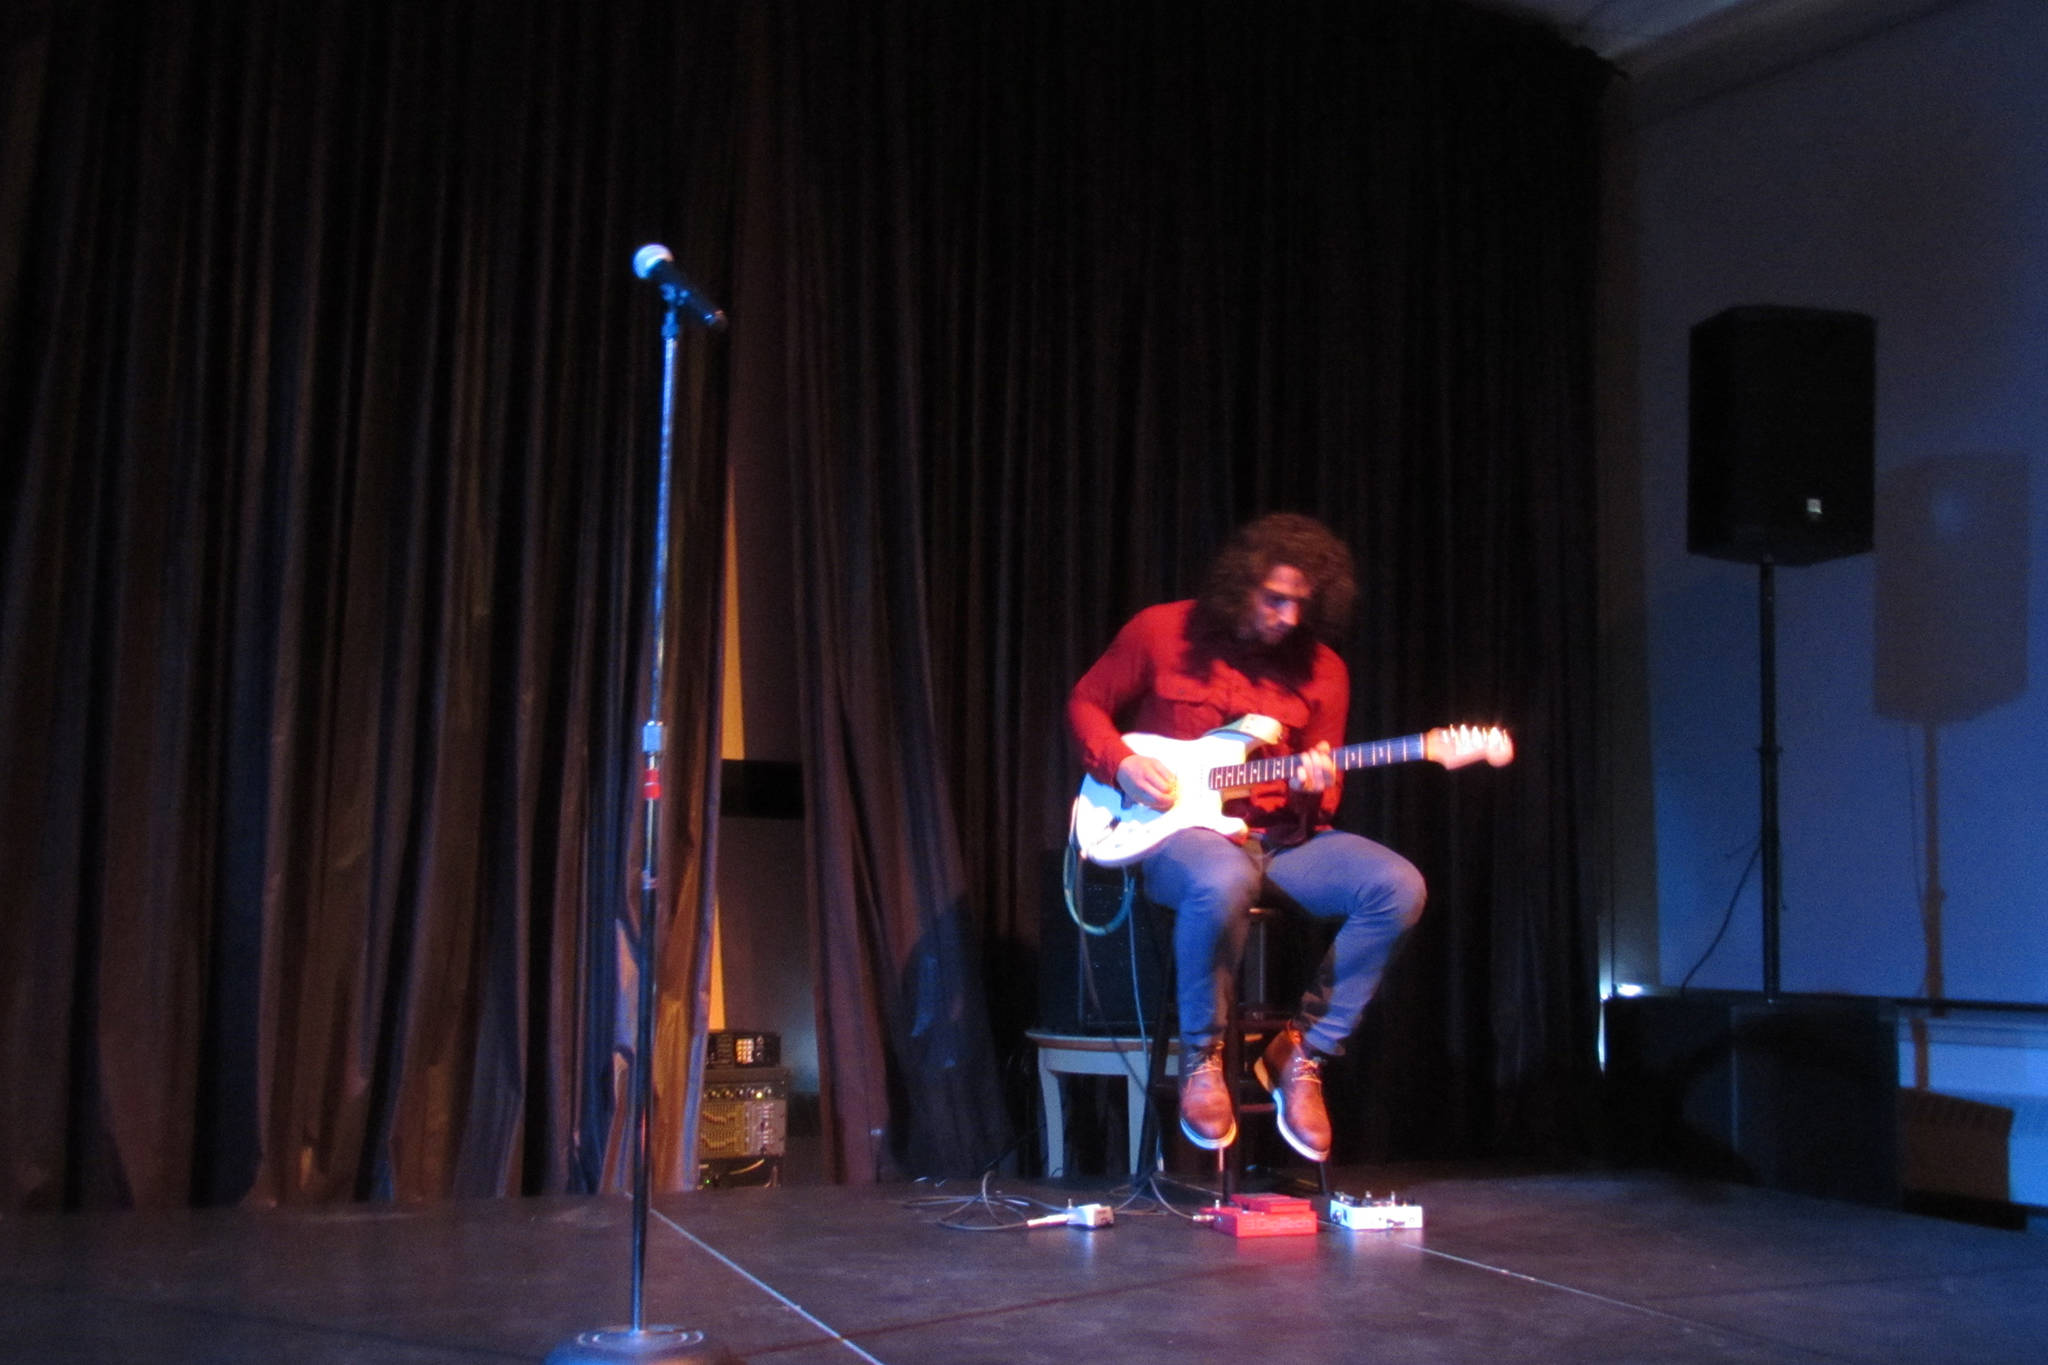 Avery Stewart on stage during the Woosh Kinaadeiyí Poetry Slam, Oct. 20. With the pedals near his feet, Stewart can provide backing instrumental loops for his guitar playing. (Ben Hohenstatt | Capital City Weekly)